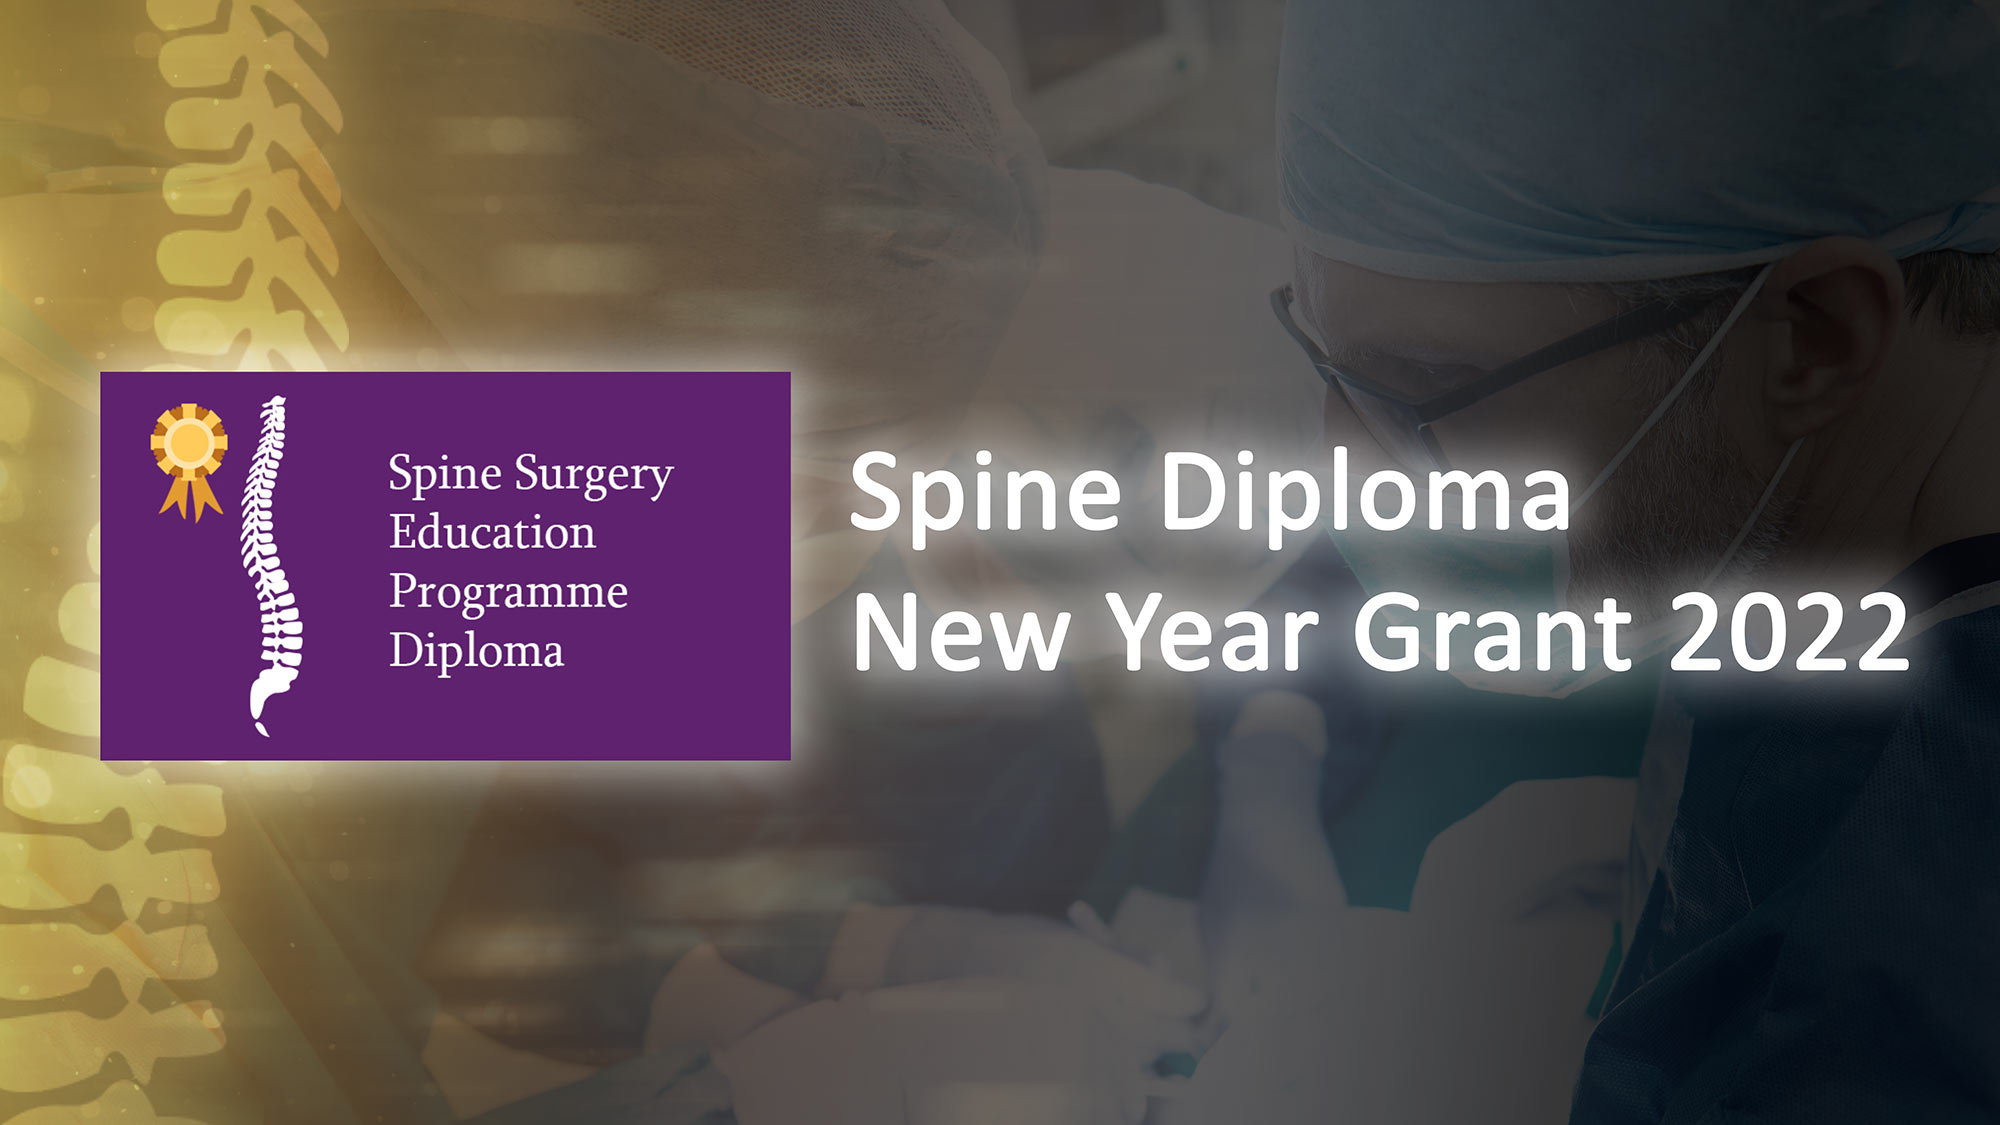 Diploma in Spine Surgery - eccElearning